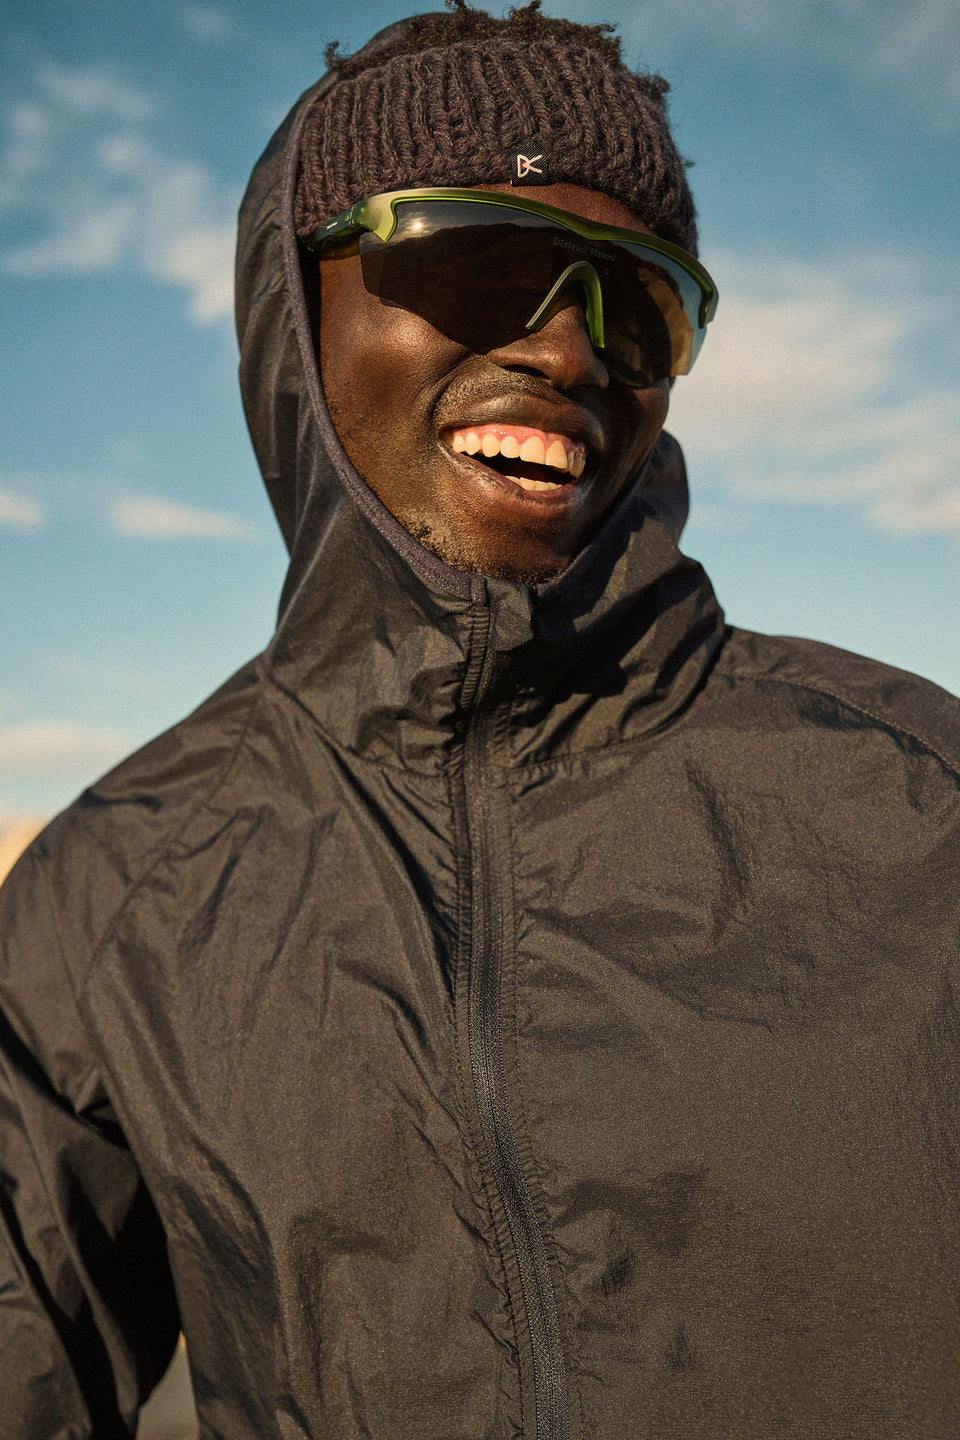 District Vision - Performance Eyewear for Runners